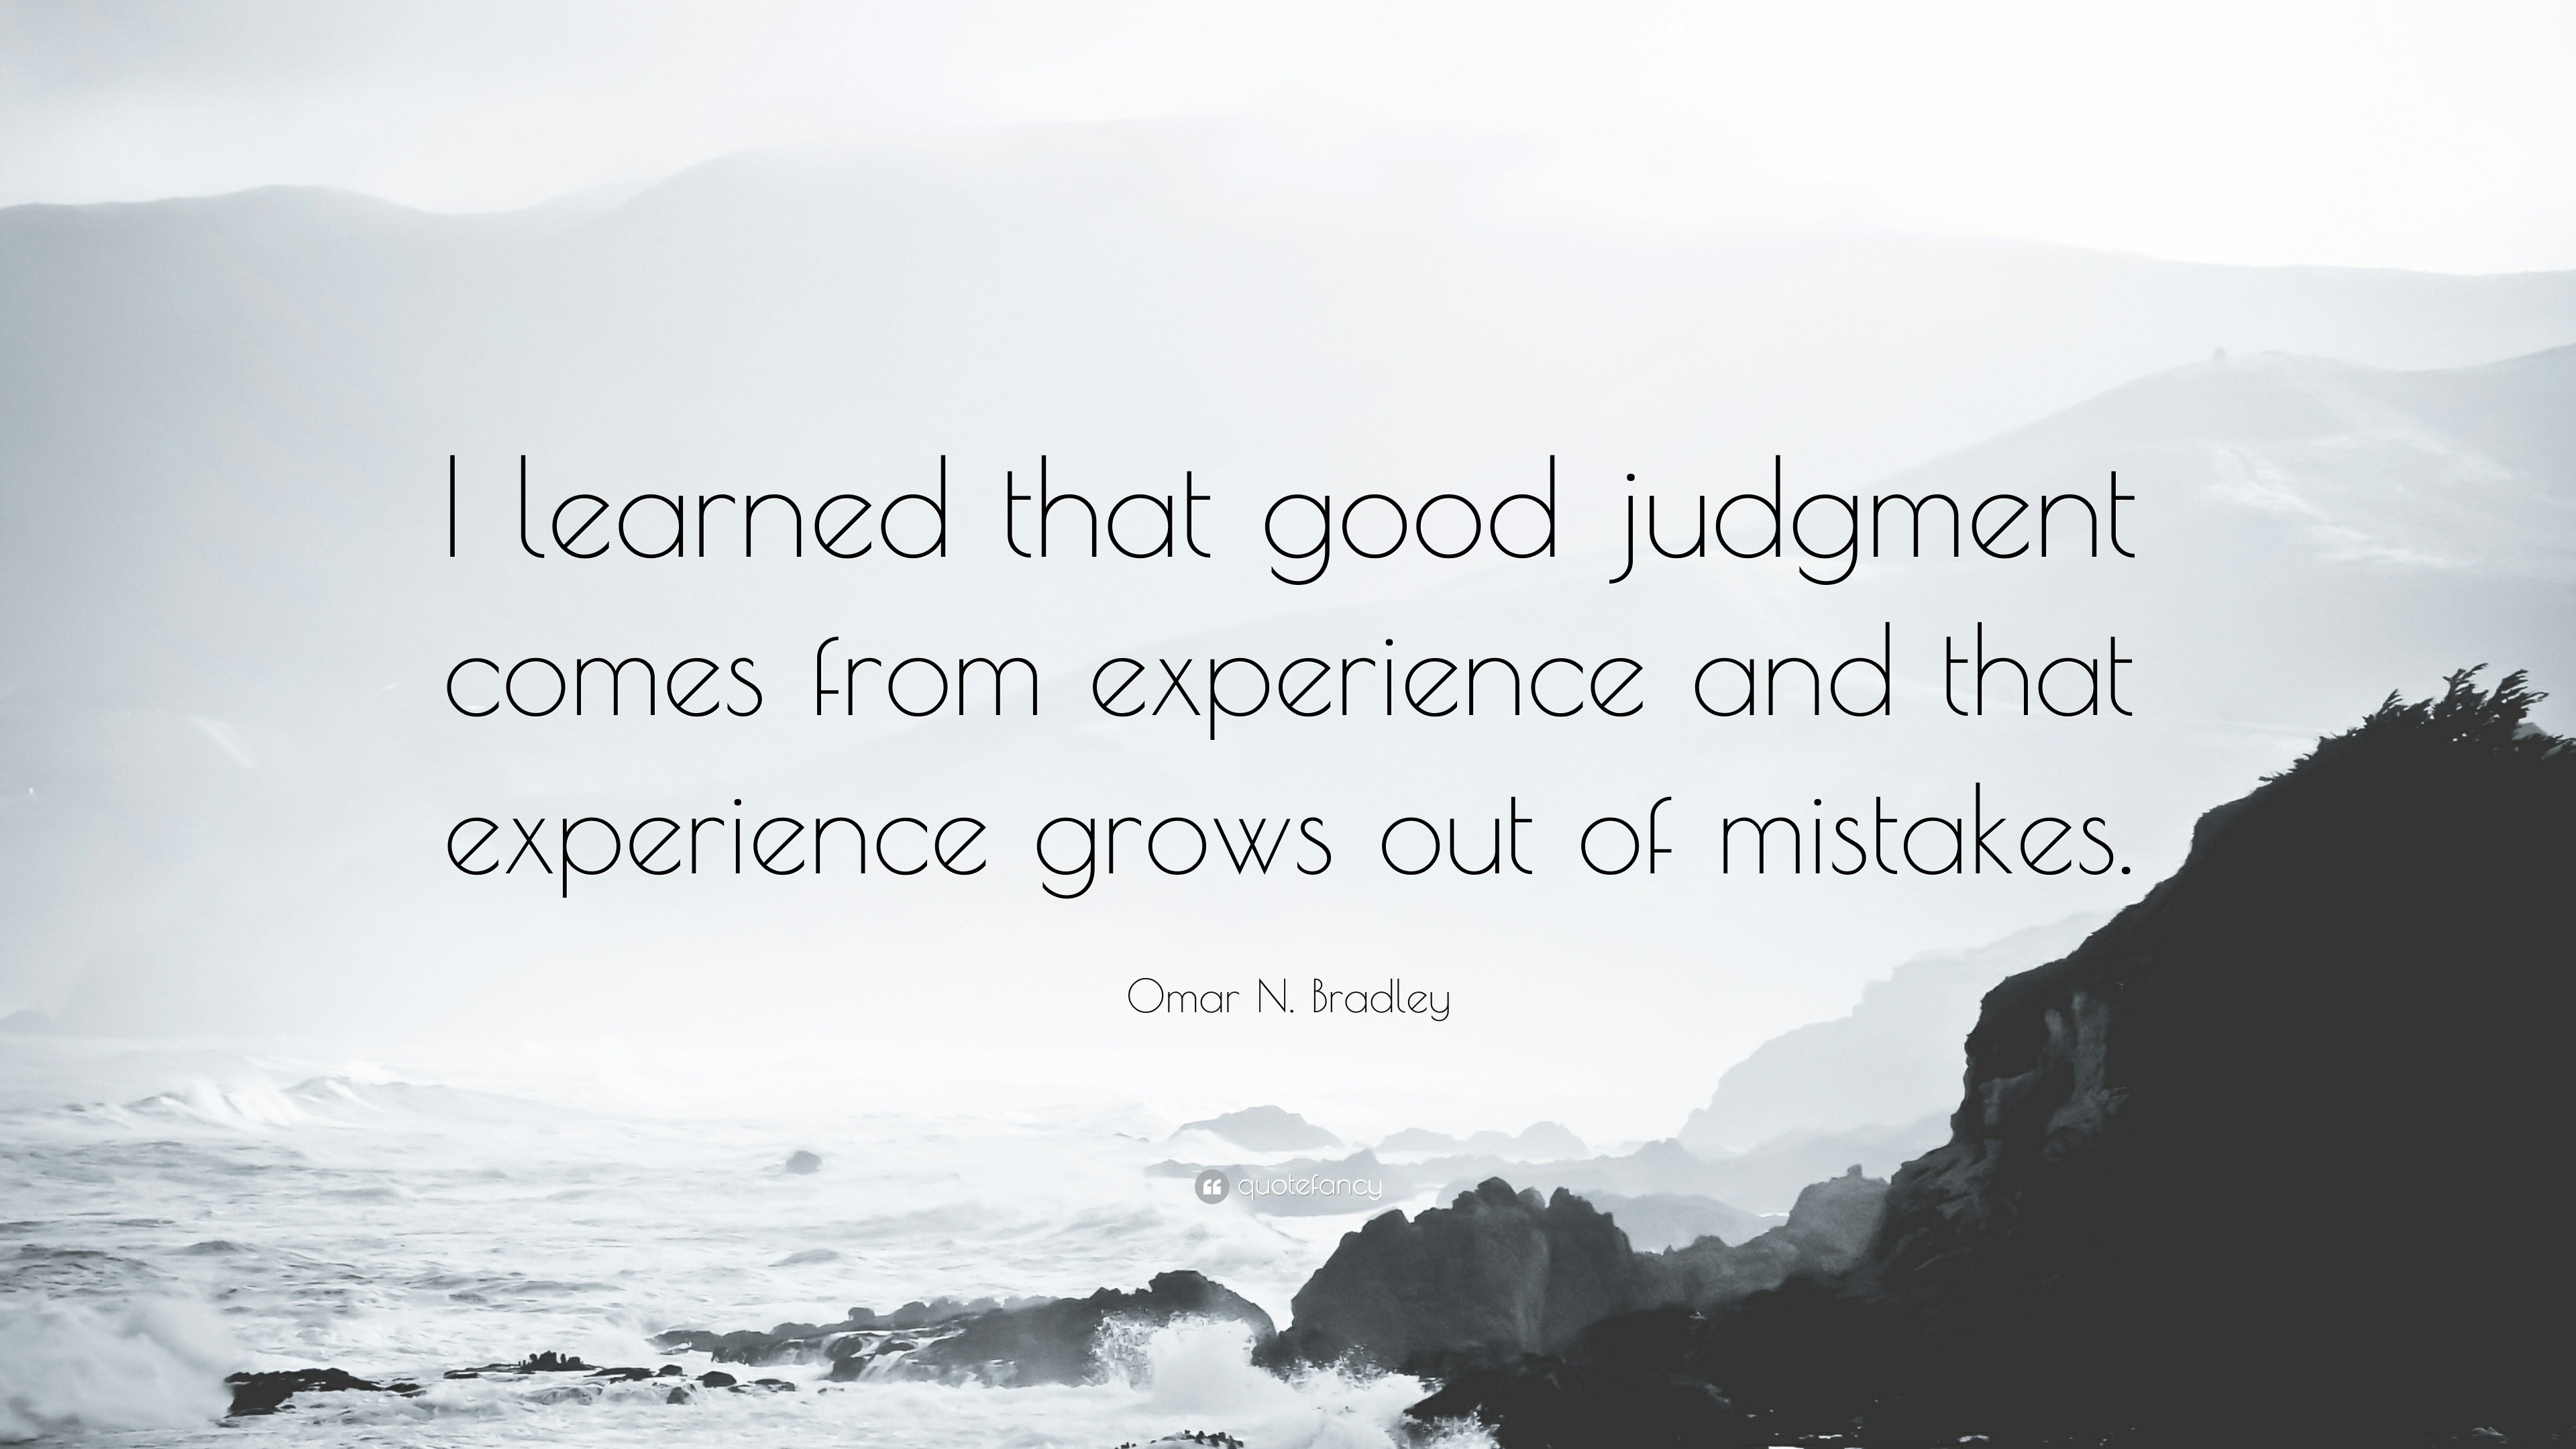 Omar N. Bradley Quote: “I learned that good judgment comes from